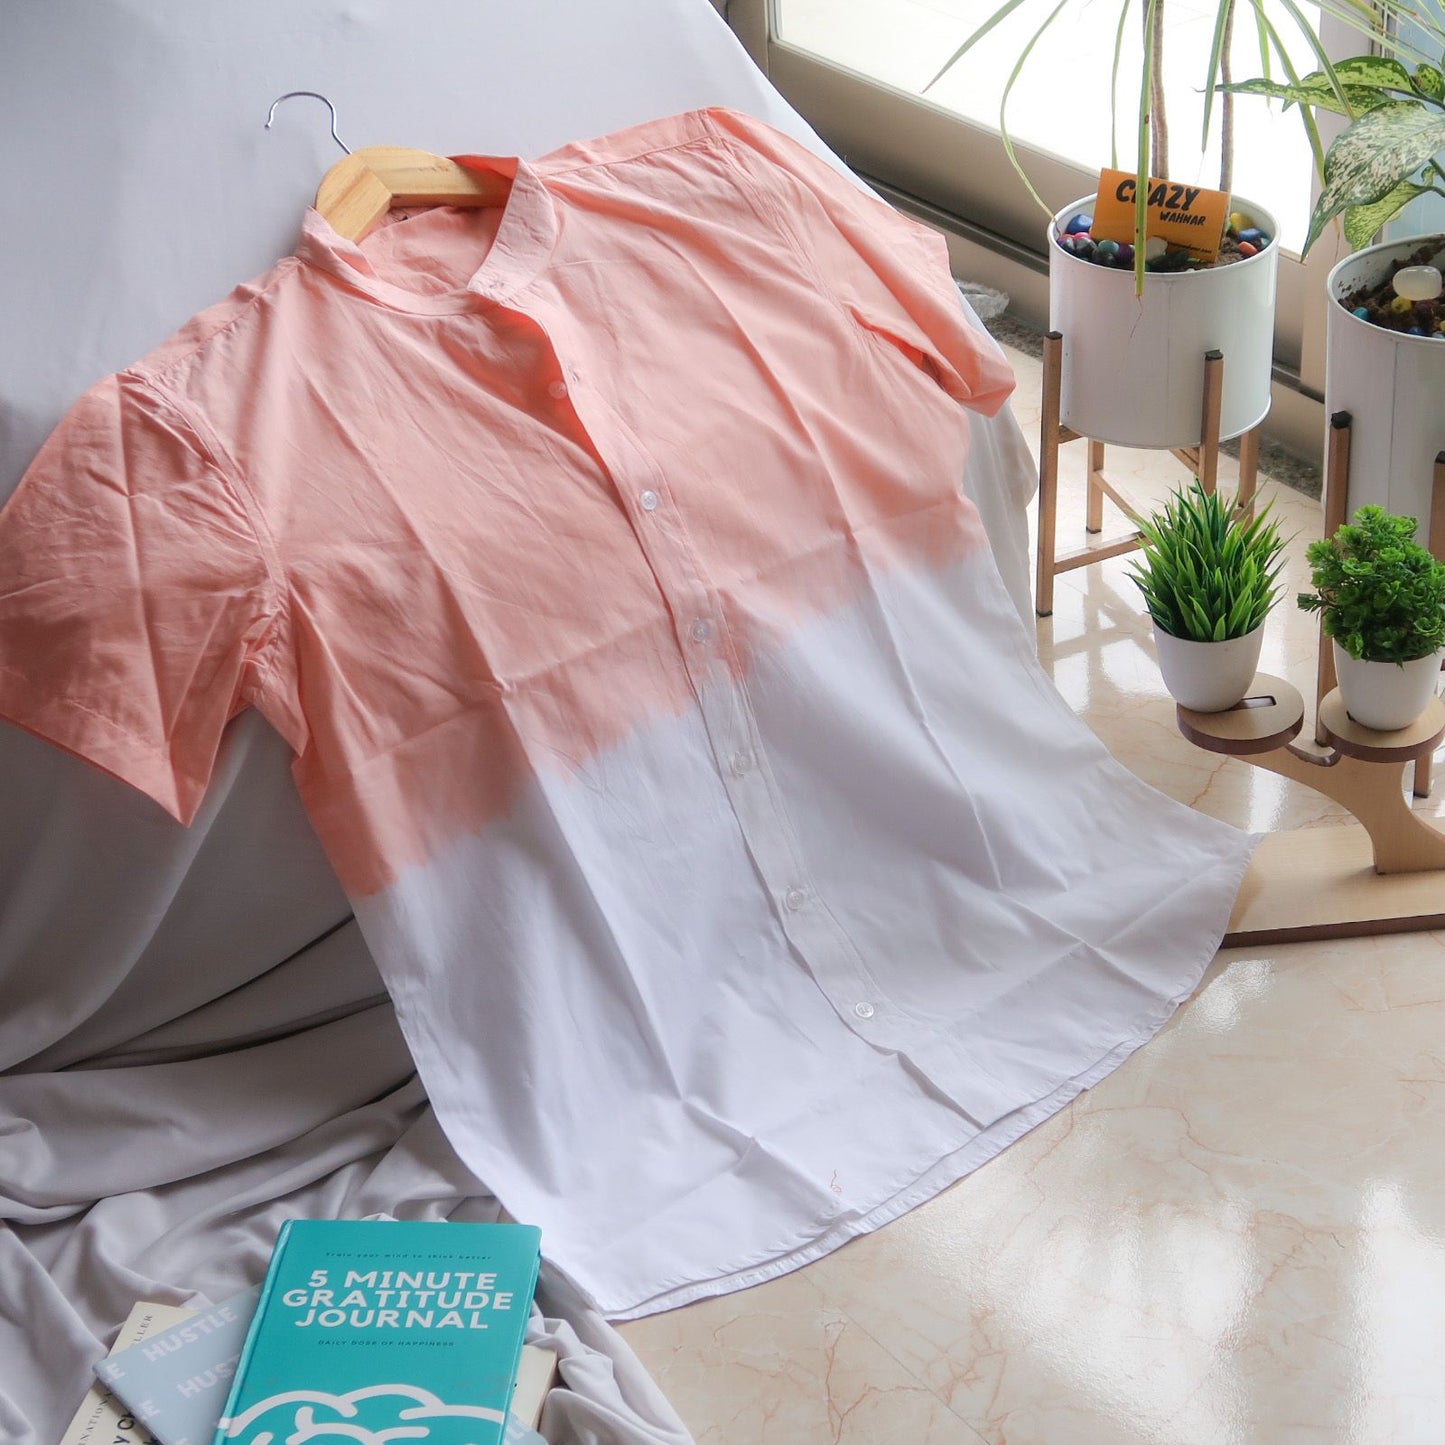 Dual-Tone Delight: Peach And White Short Sleeves Shirt